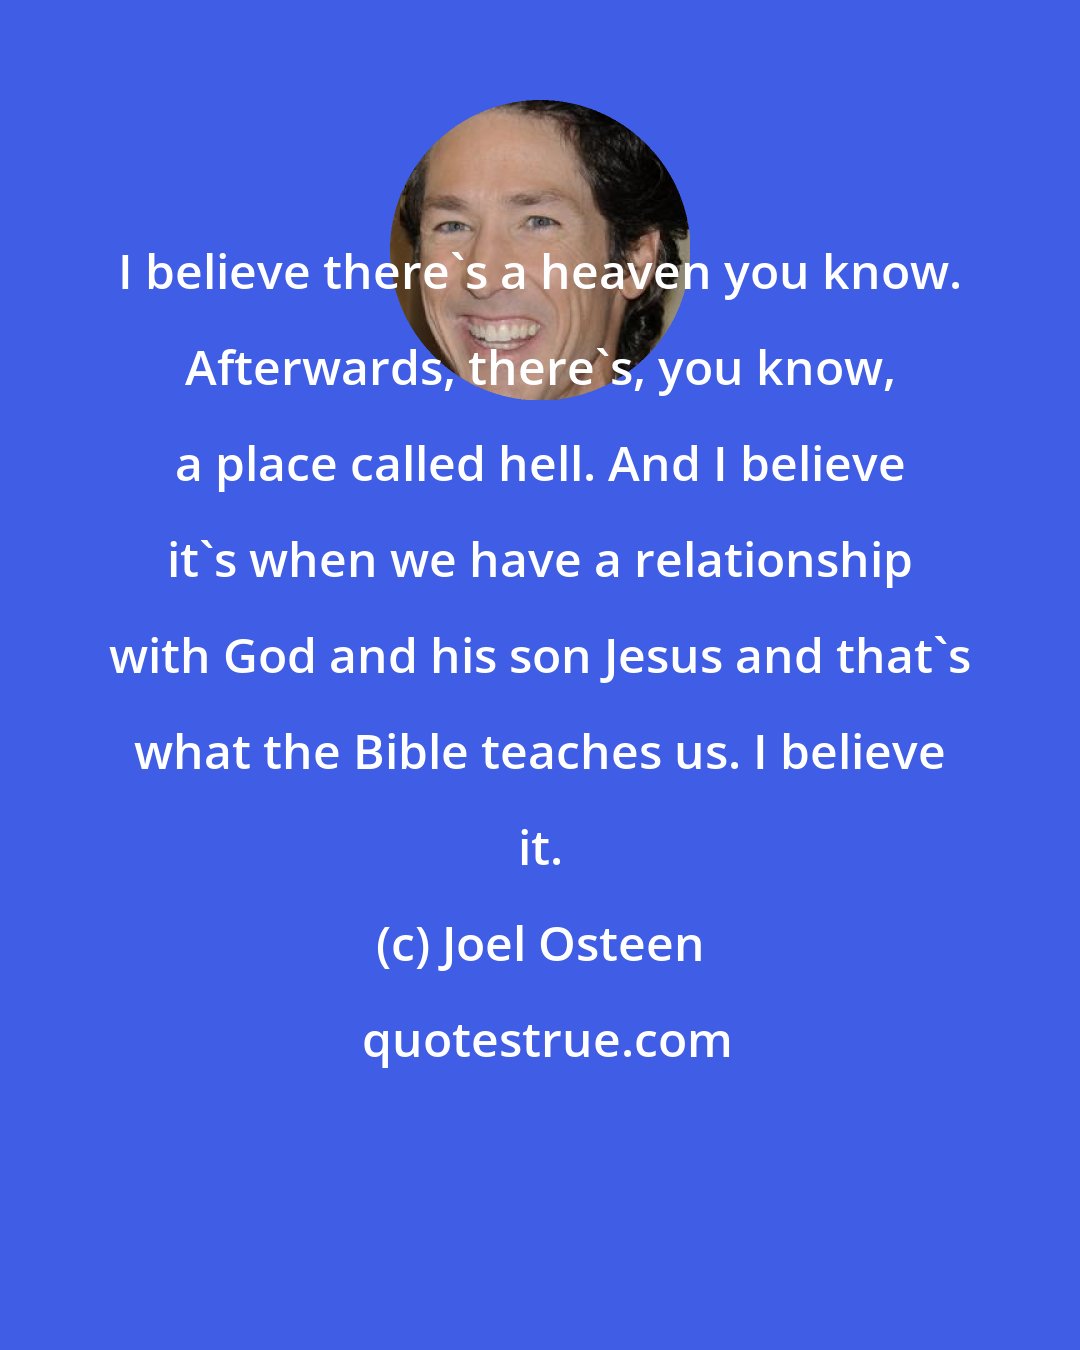 Joel Osteen: I believe there's a heaven you know. Afterwards, there's, you know, a place called hell. And I believe it's when we have a relationship with God and his son Jesus and that's what the Bible teaches us. I believe it.